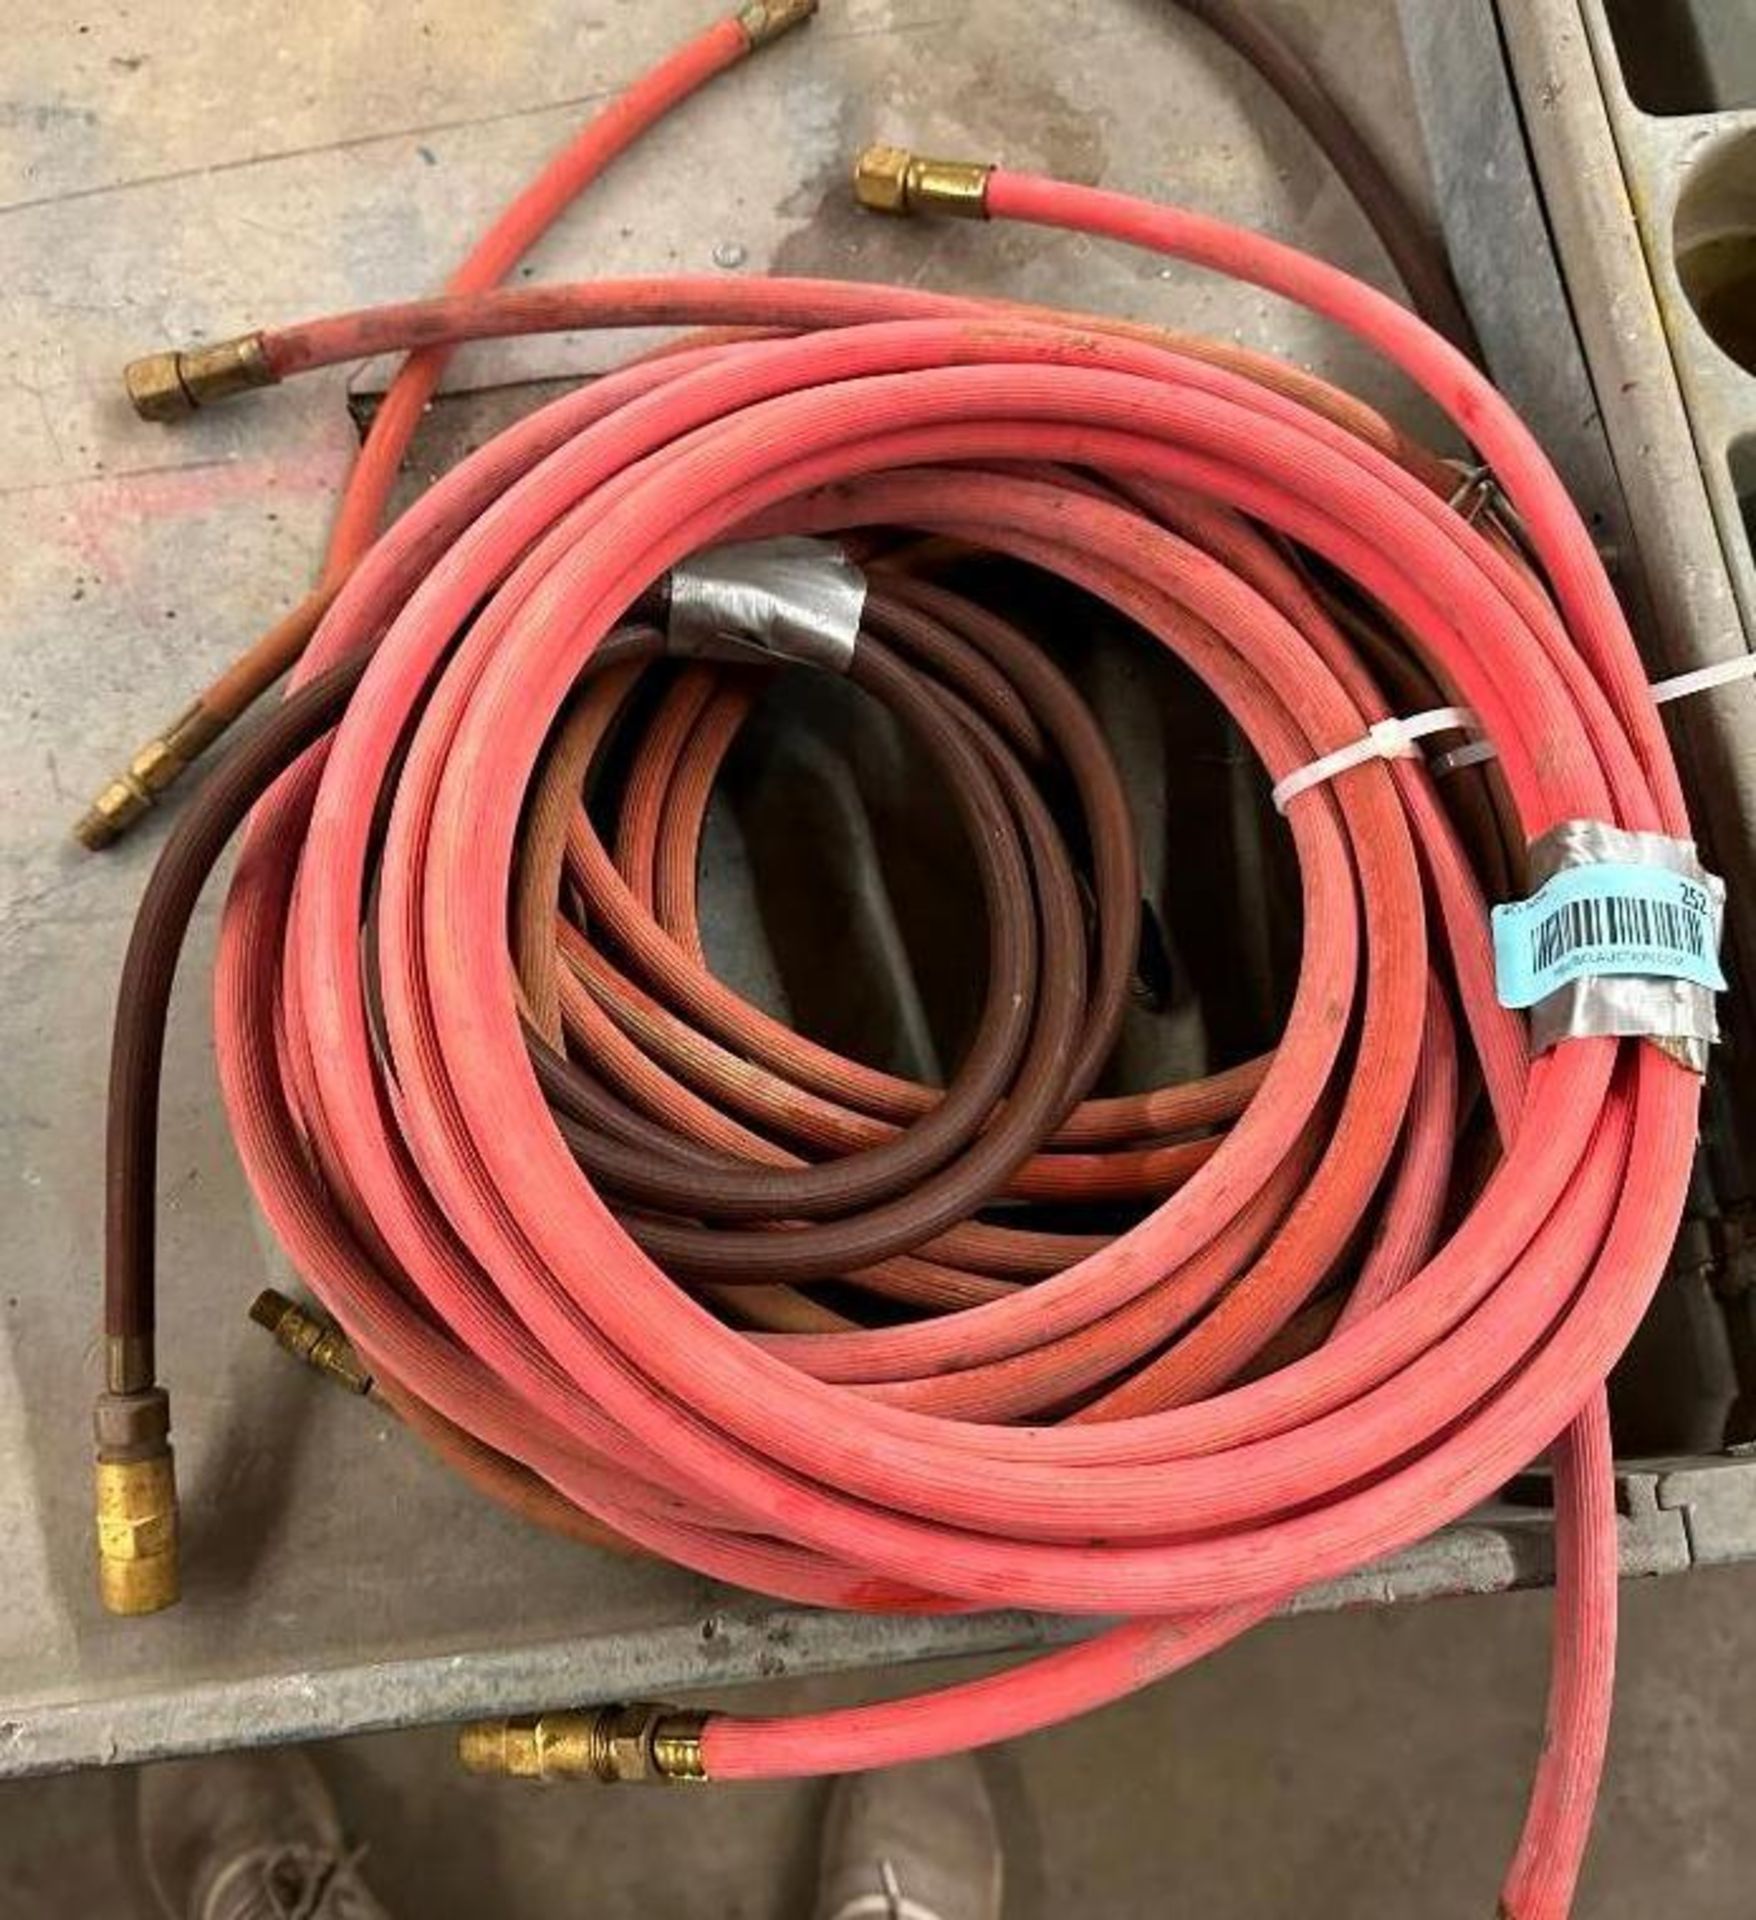 ASSORTED GAS HOSES AS SHOWN